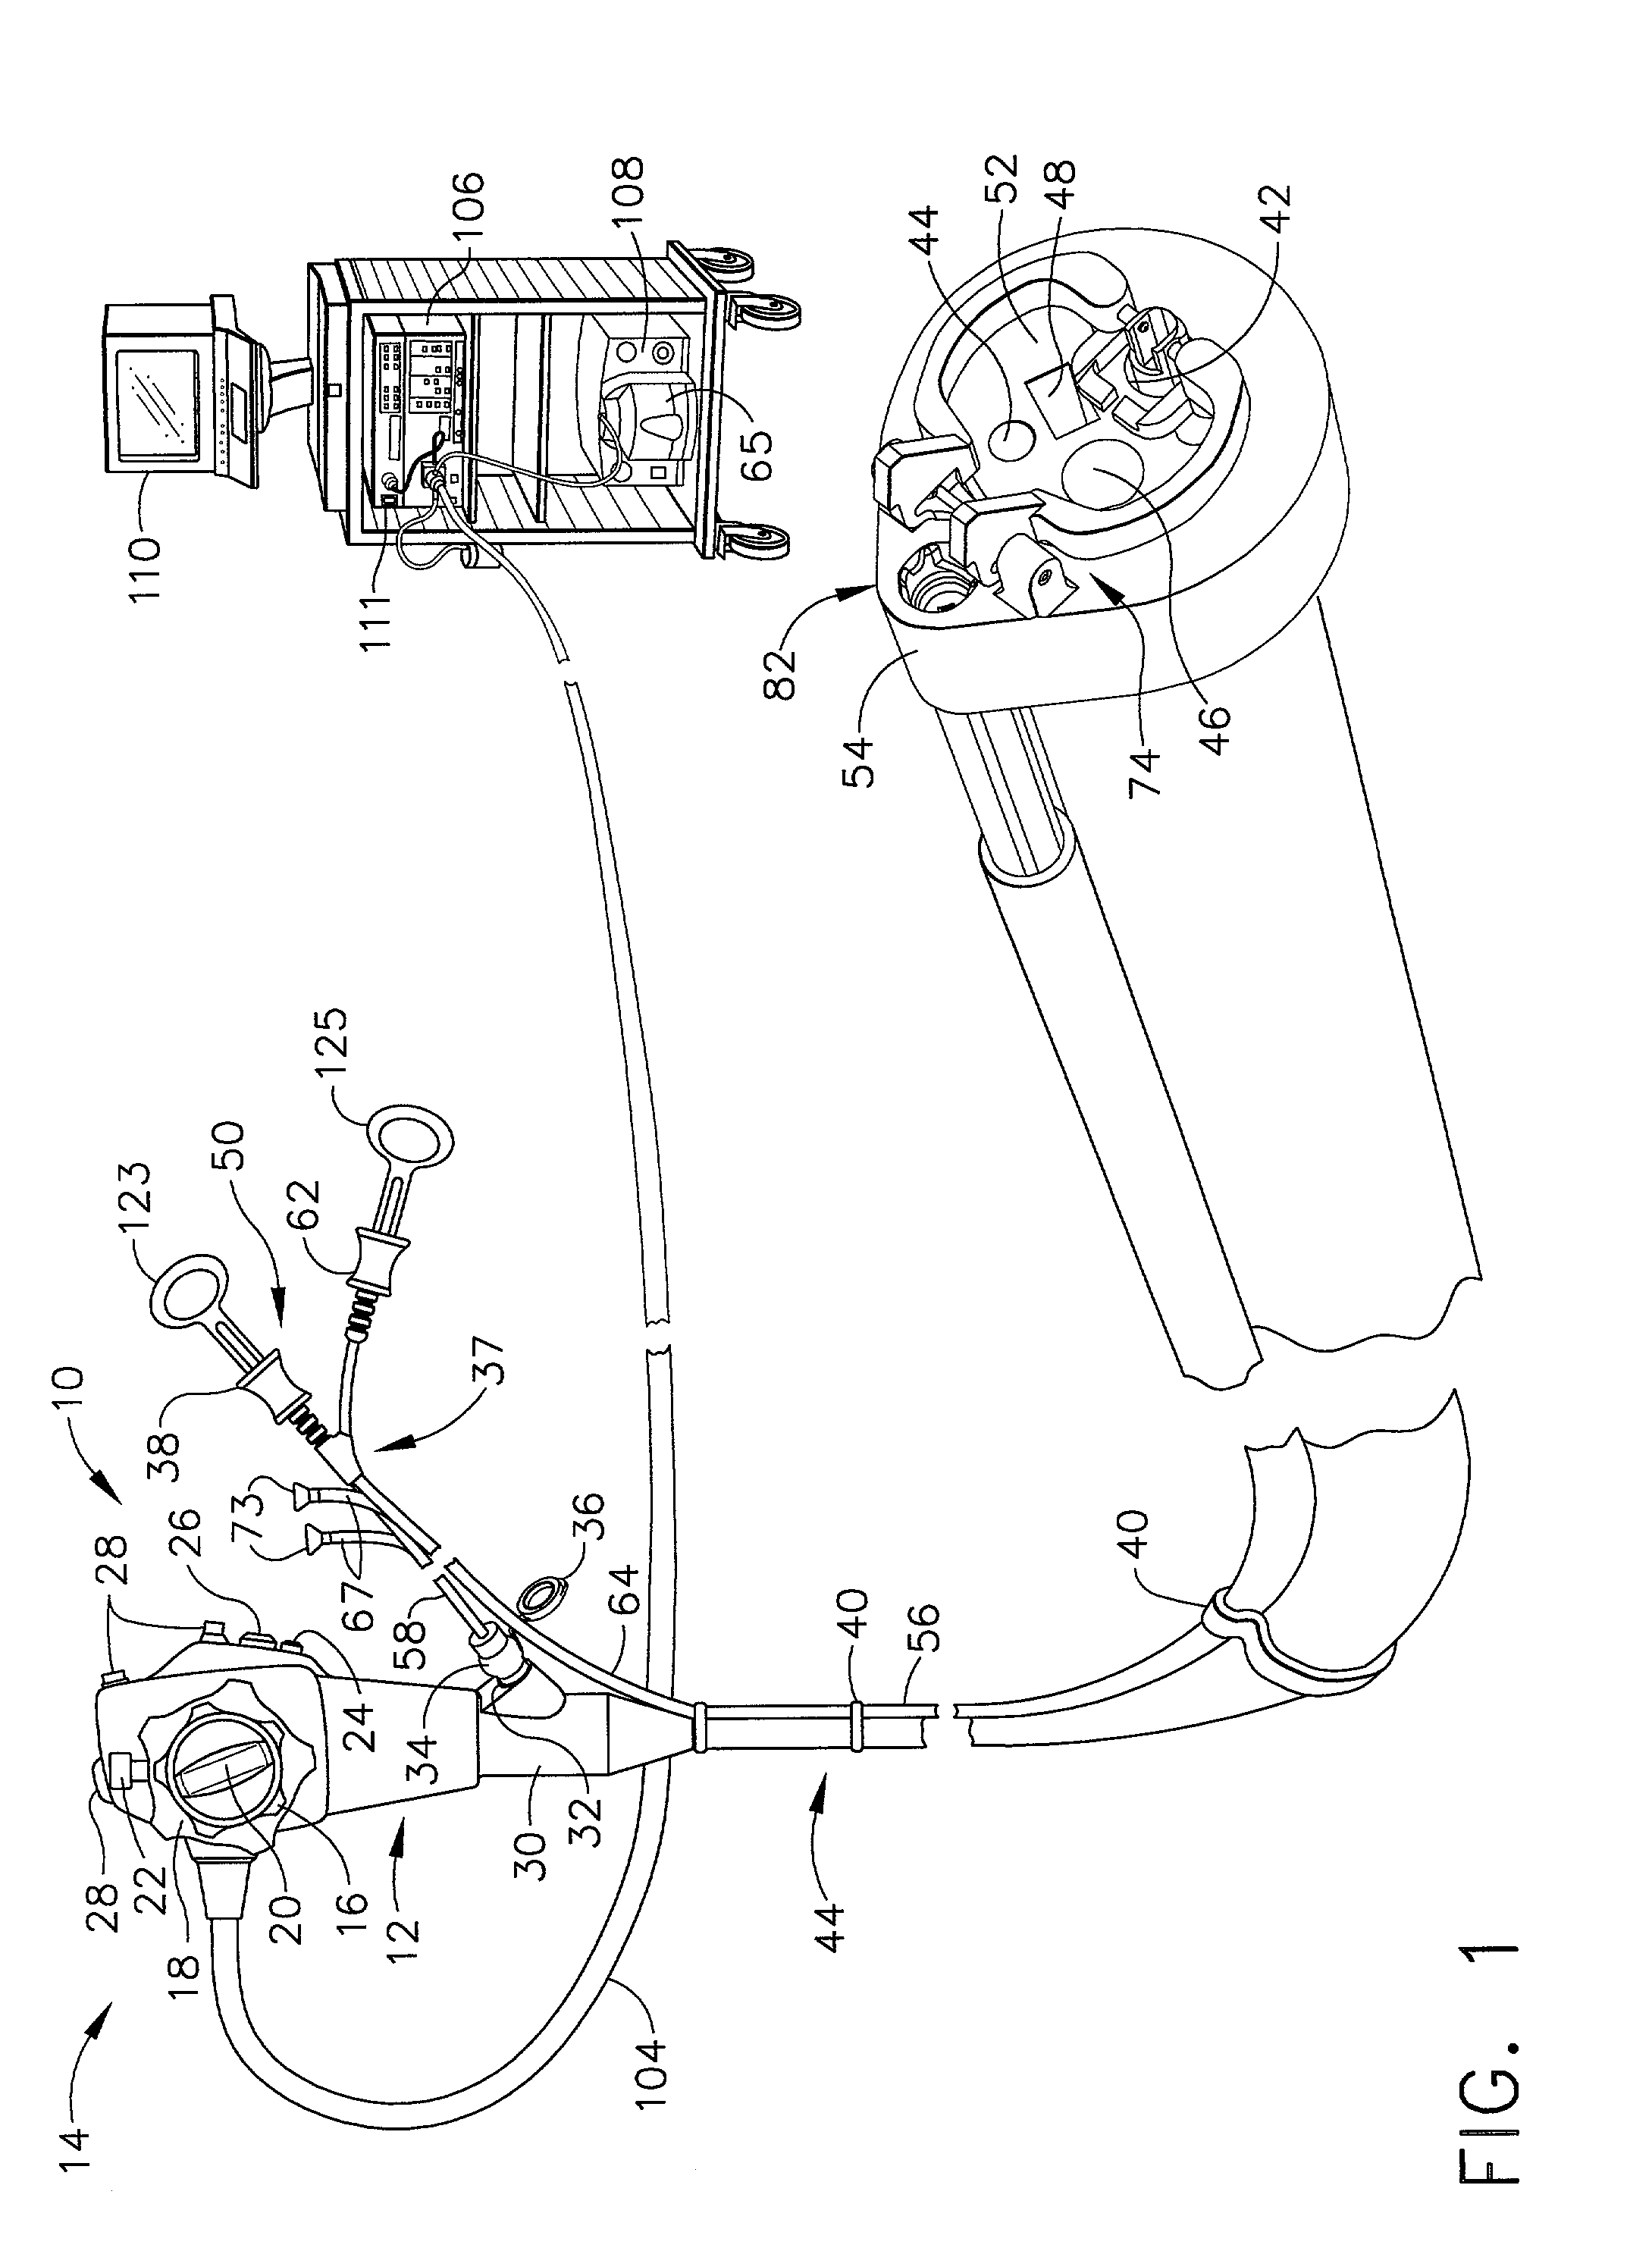 Biopsy forceps device and method